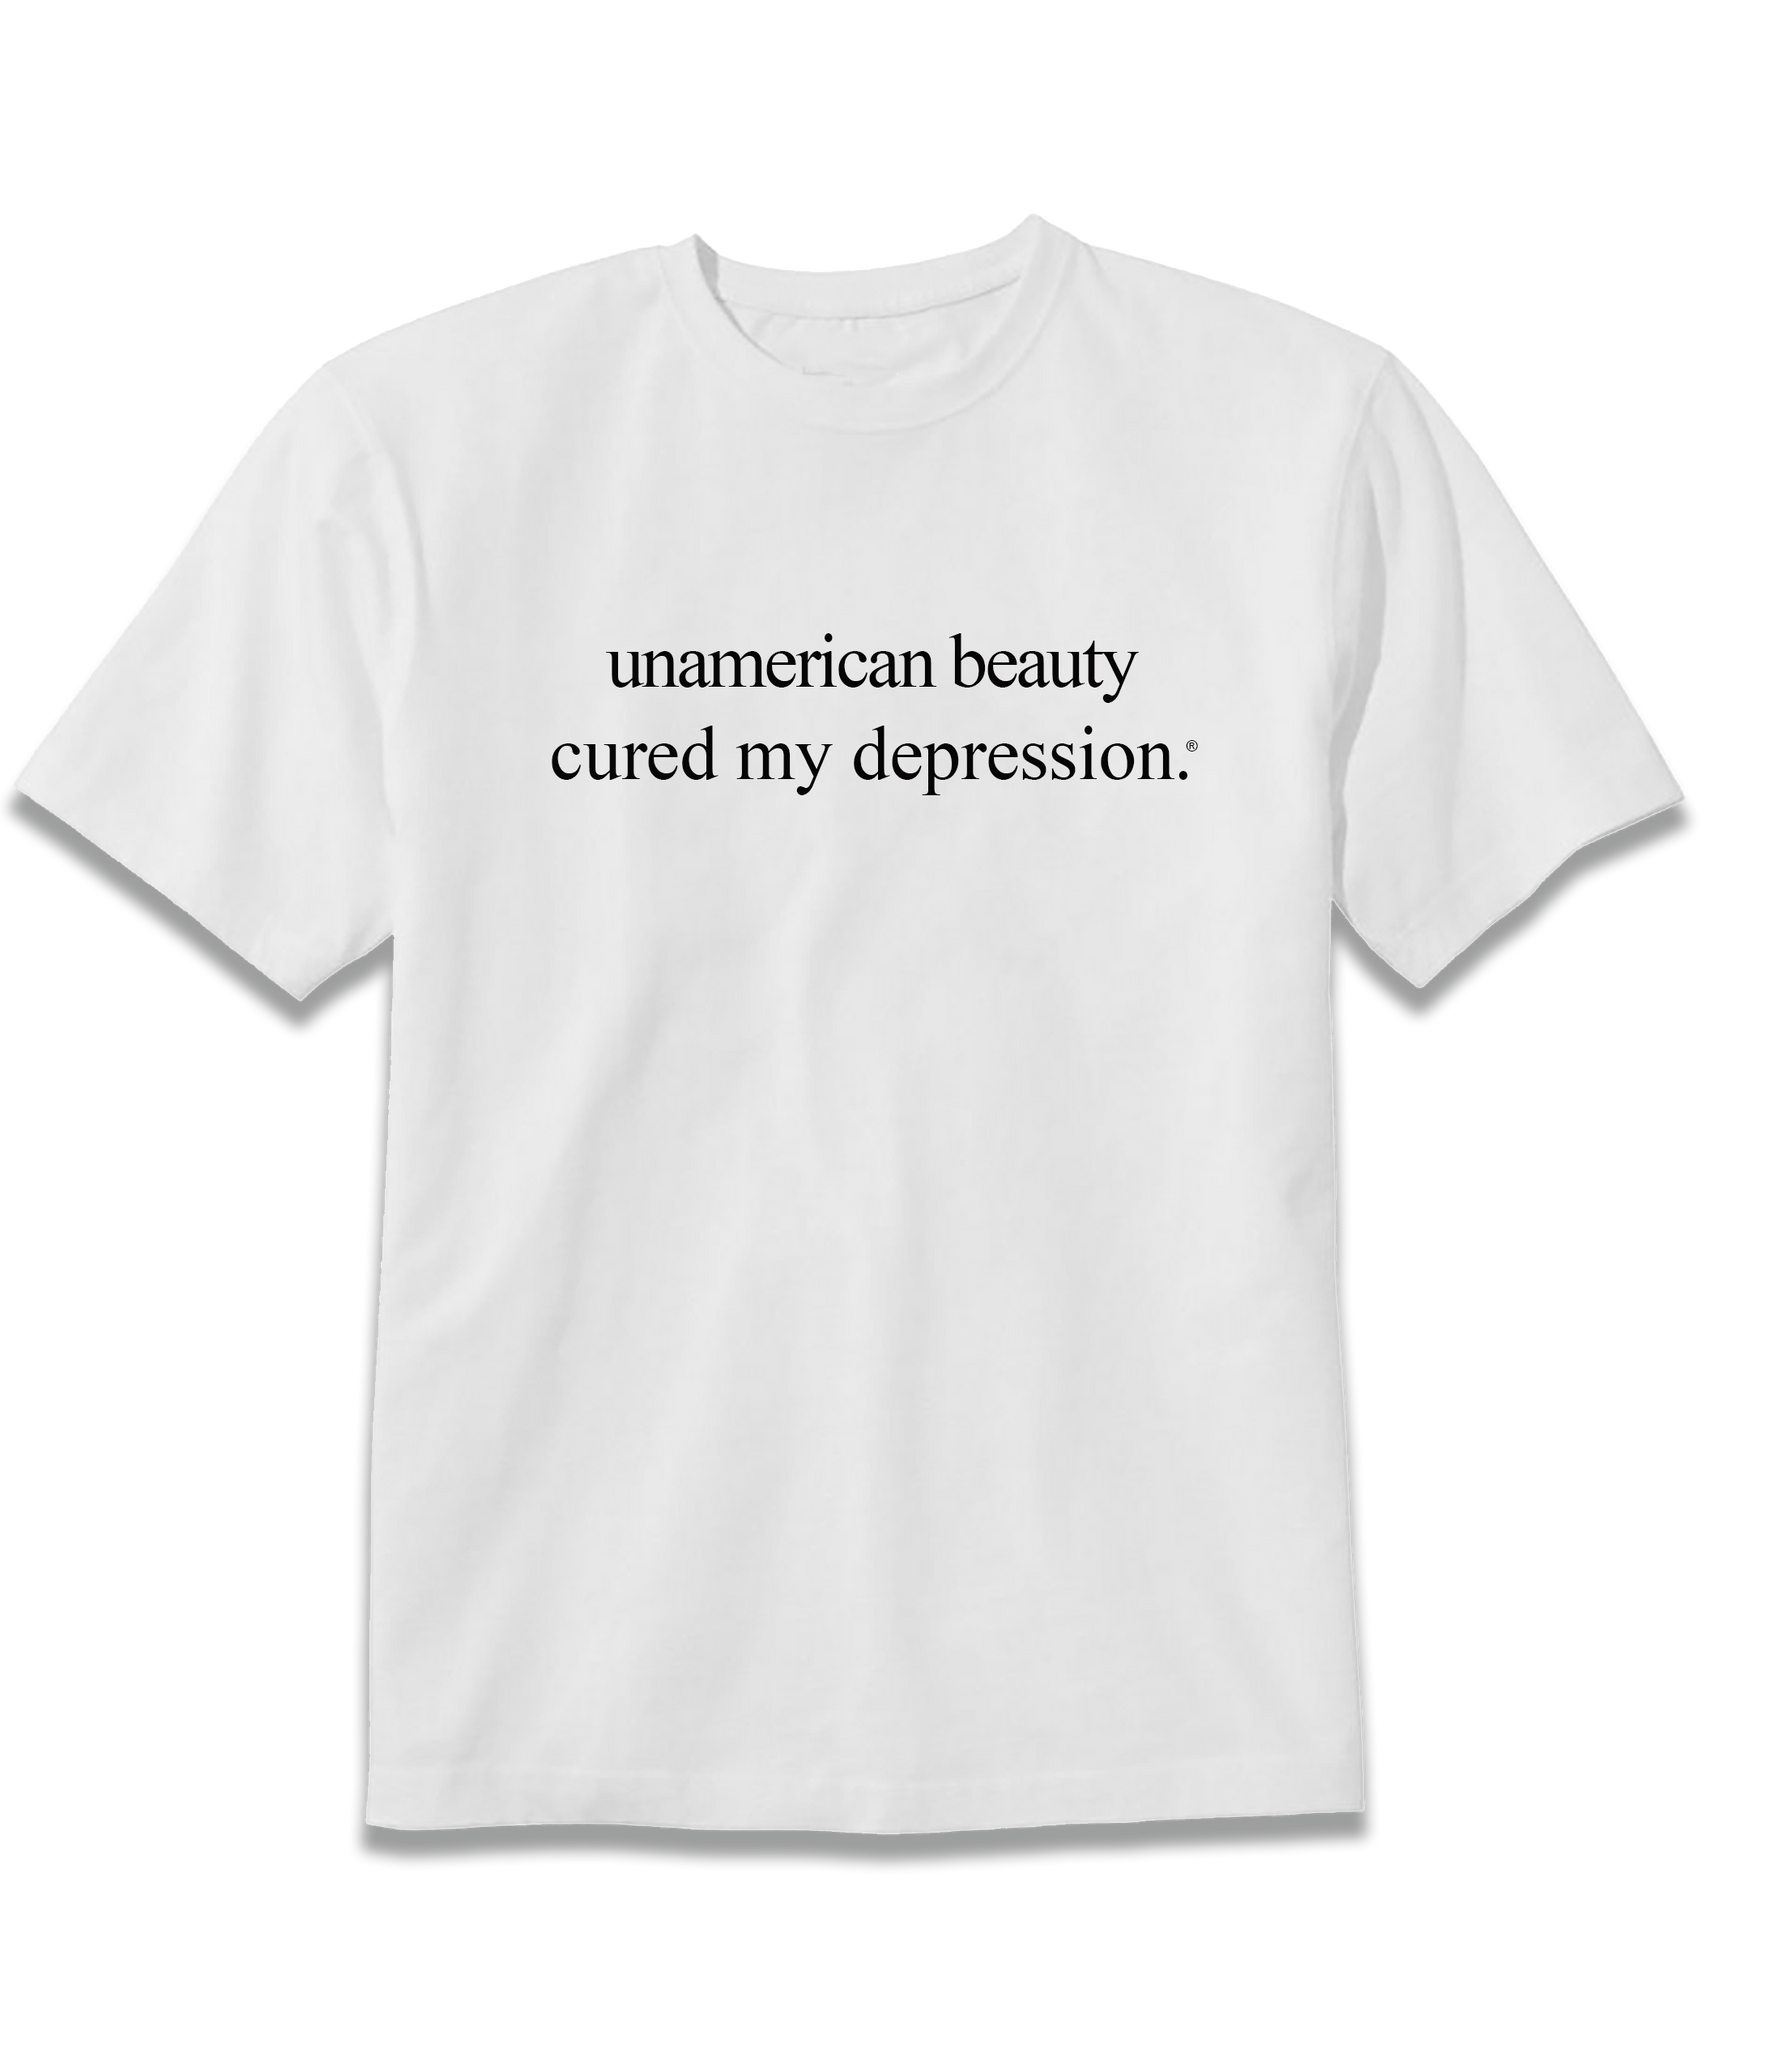 UNAMERICAN BEAUTY CURED MY DEPRESSION TEE